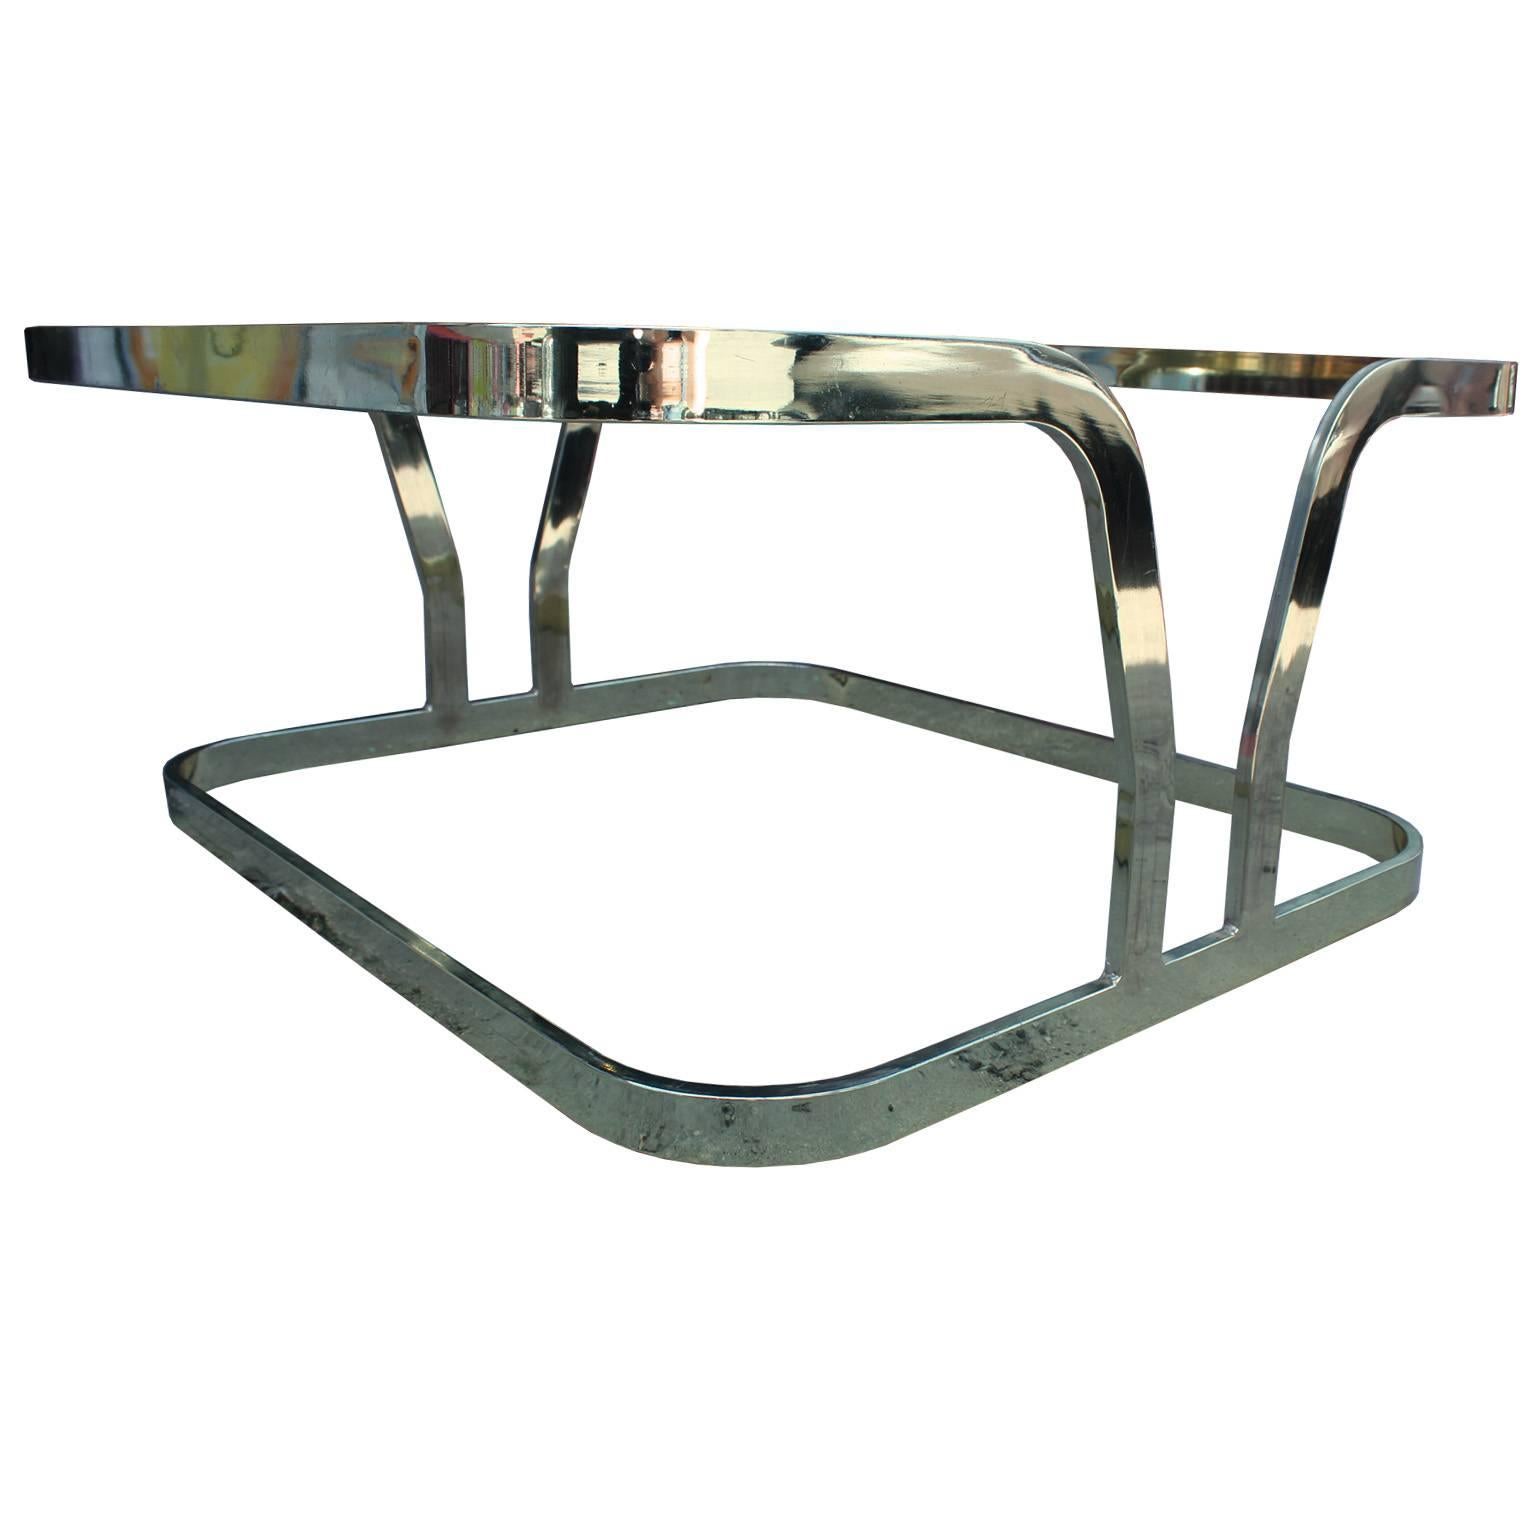 Excellent square coffee table. Sculptural flat bar brass base features a cantilevered shape. Topped with thick glass. Fabulous in a modern, Hollywood Regency, or Mid-Century space. Inquire for matching side tables and console.